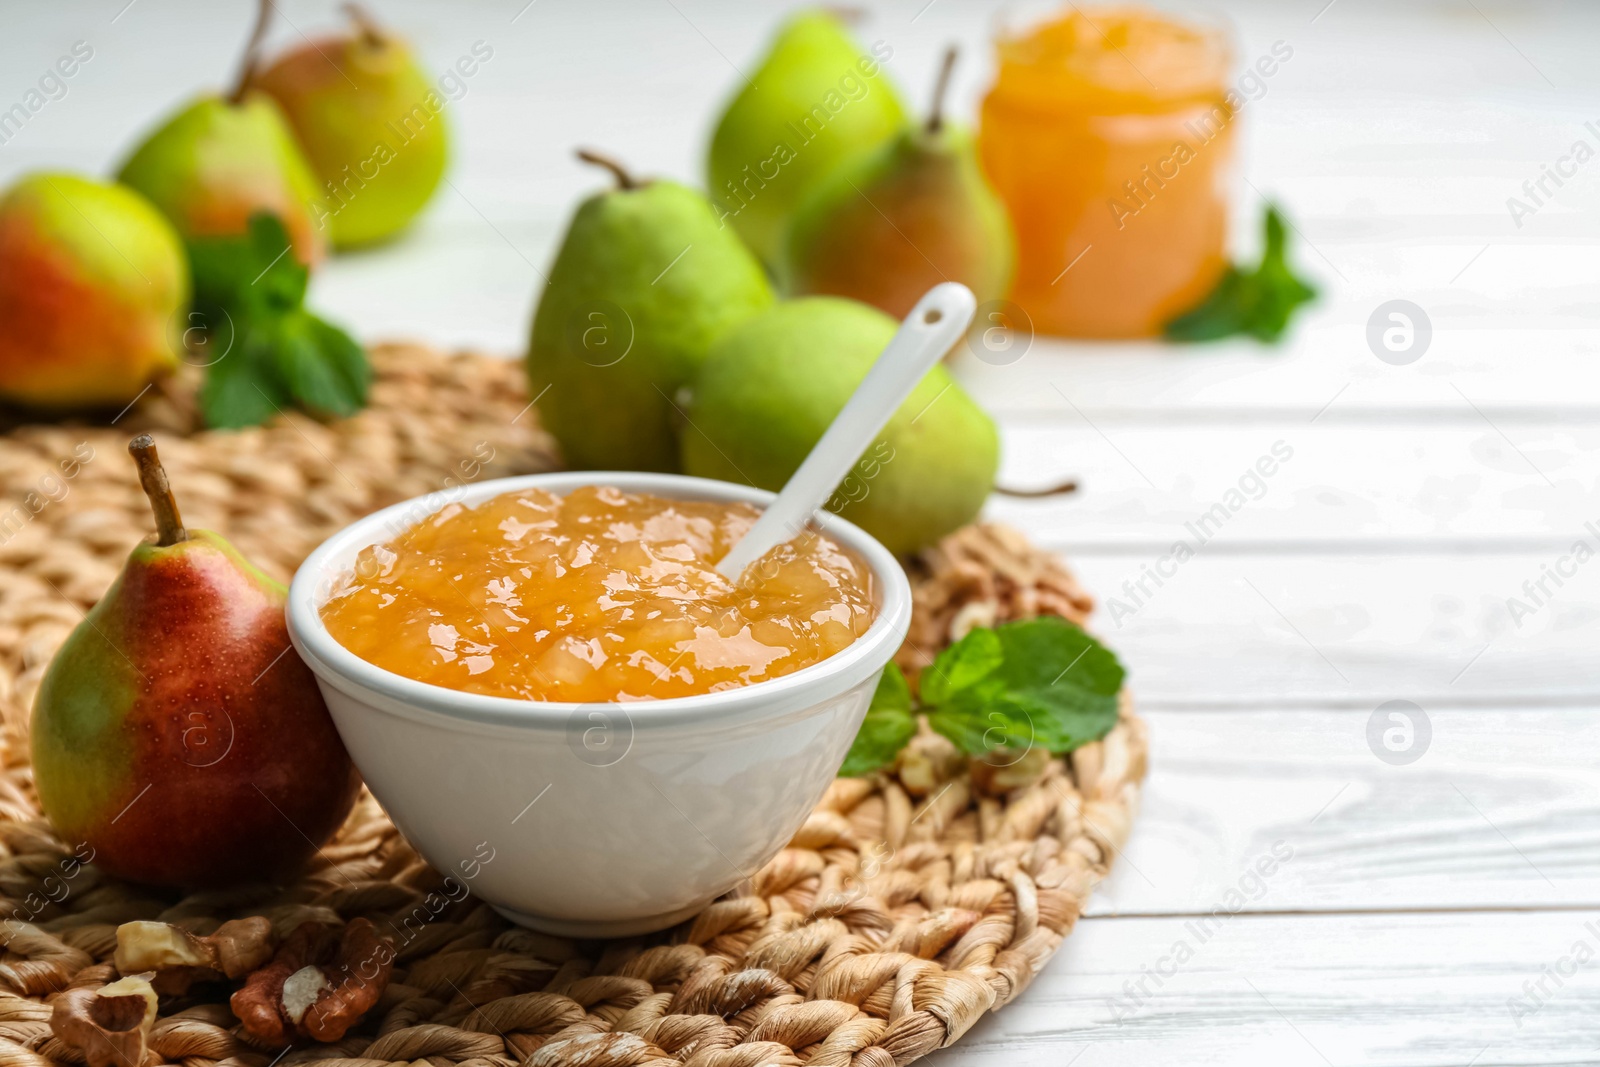 Photo of Delicious pear jam and fresh fruits on white wooden table. Space for text